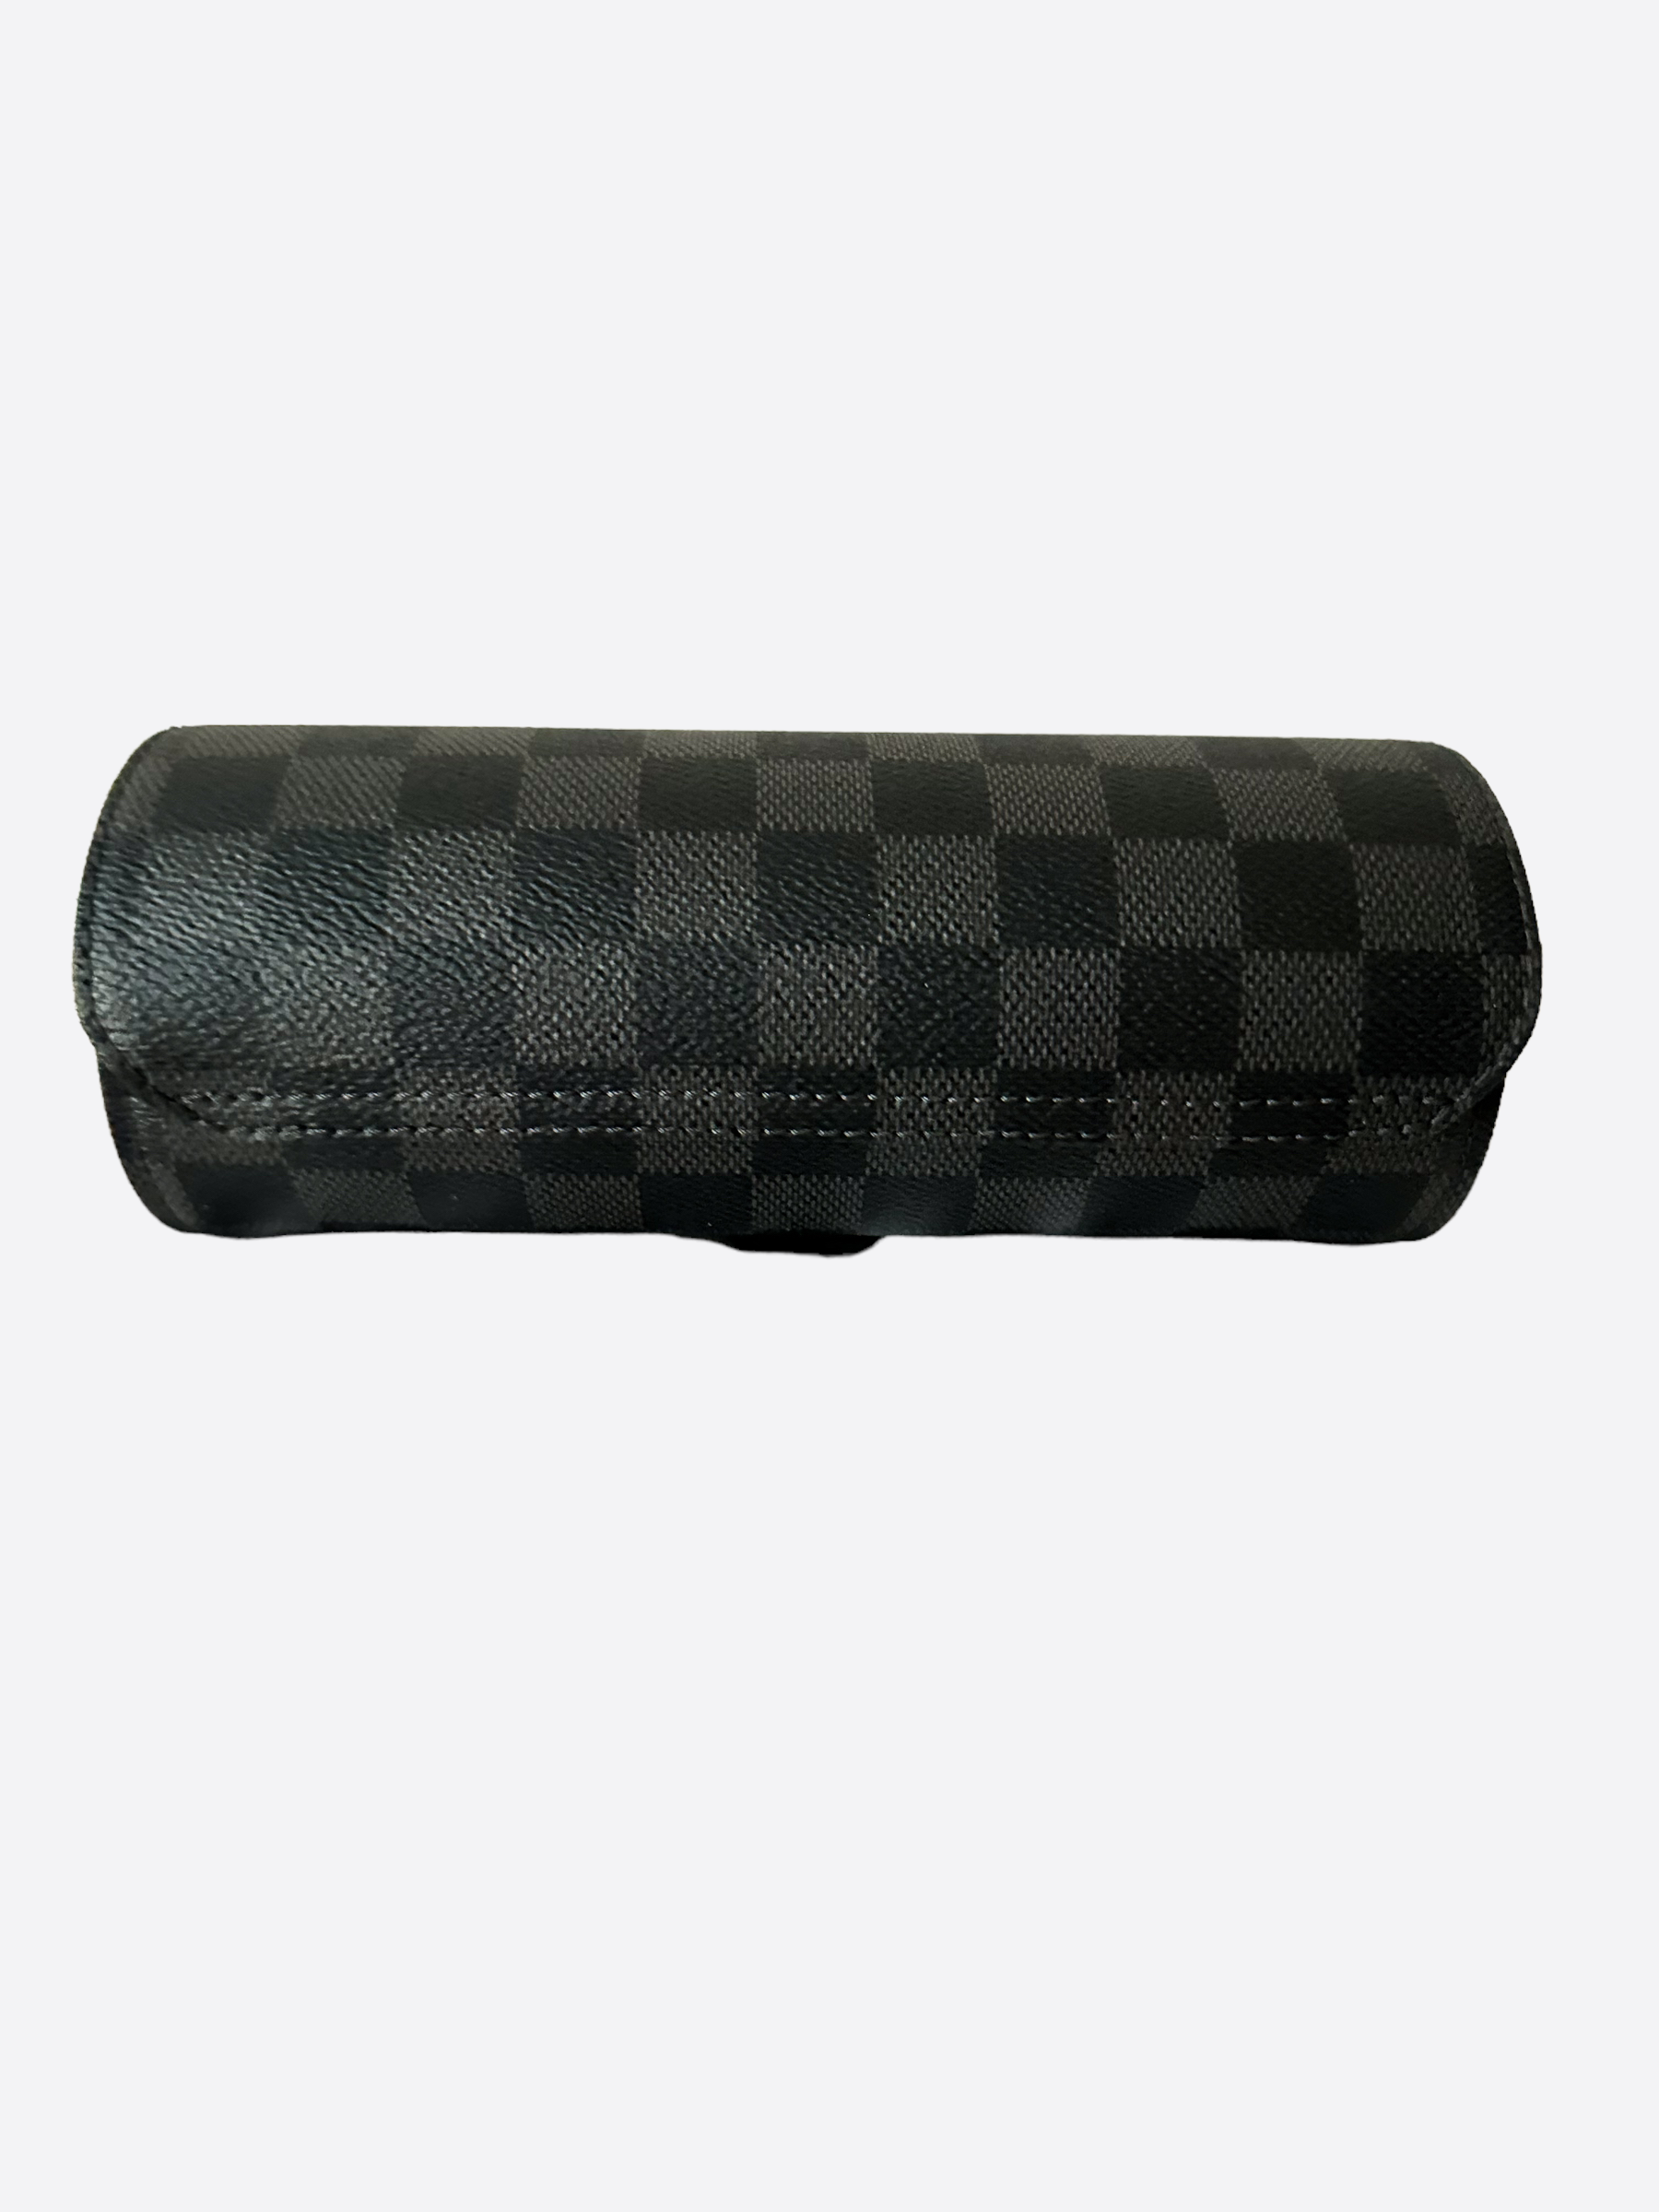 Louis Vuitton Damier Graphite 3 Watch Travel Case For Sale at 1stDibs